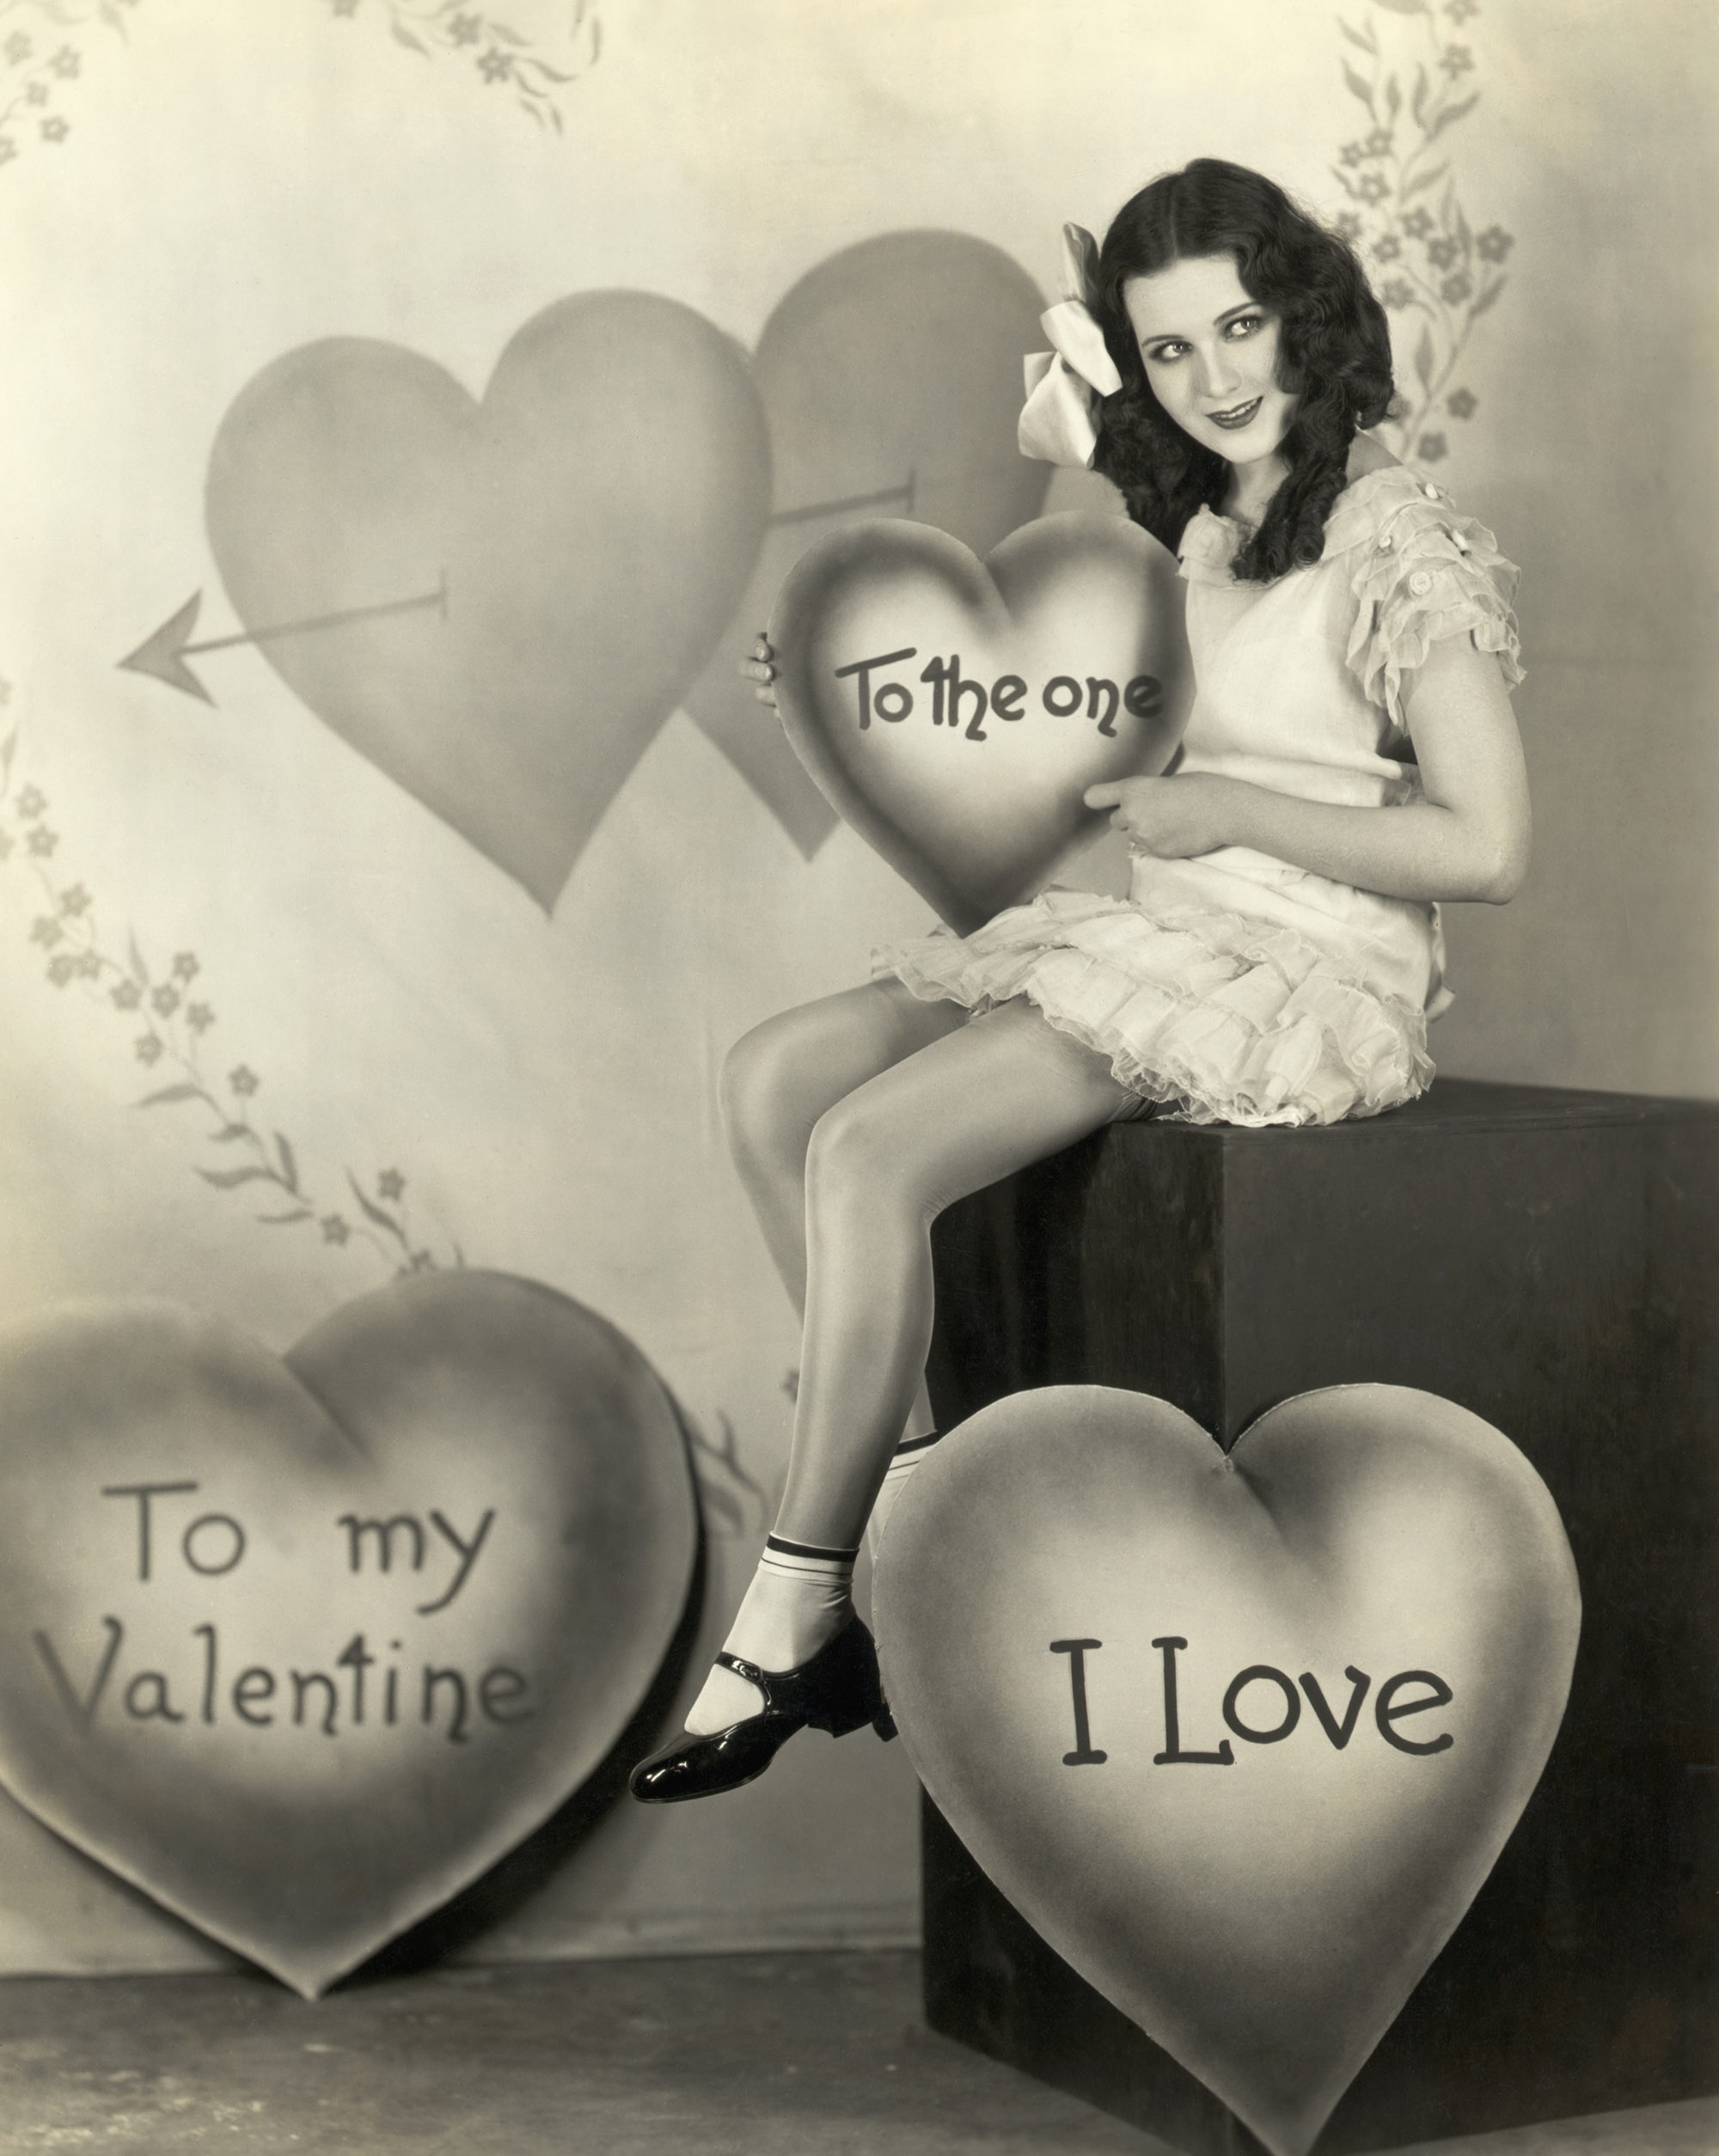 American film actress Mary Brian posing with St. Valentine's Day hearts and greetings, circa 1925.